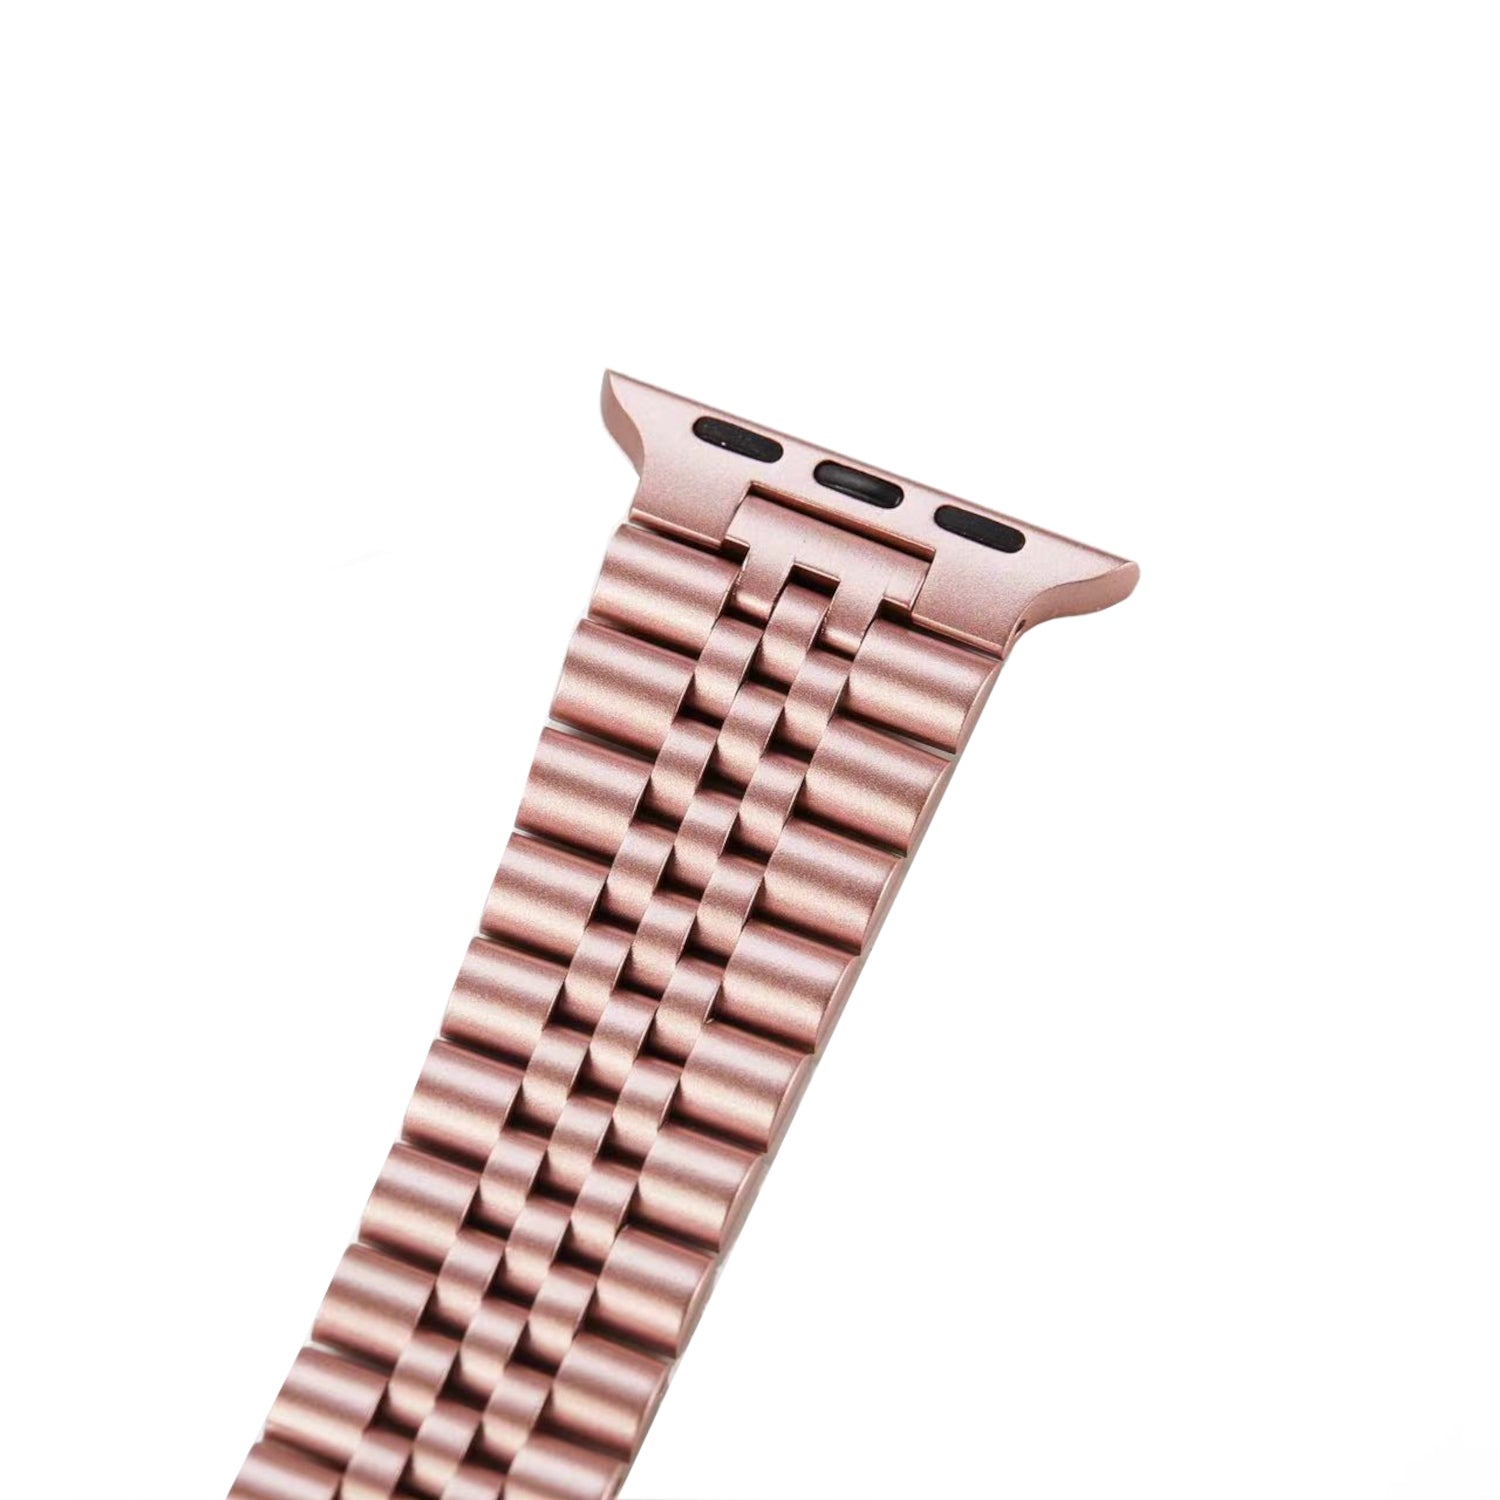 Stainless Steel Link Bracelet Band - The Perth in Rose Gold - Compatible with Apple Watch Size 38mm to 41mm - Friendie Pty Ltd